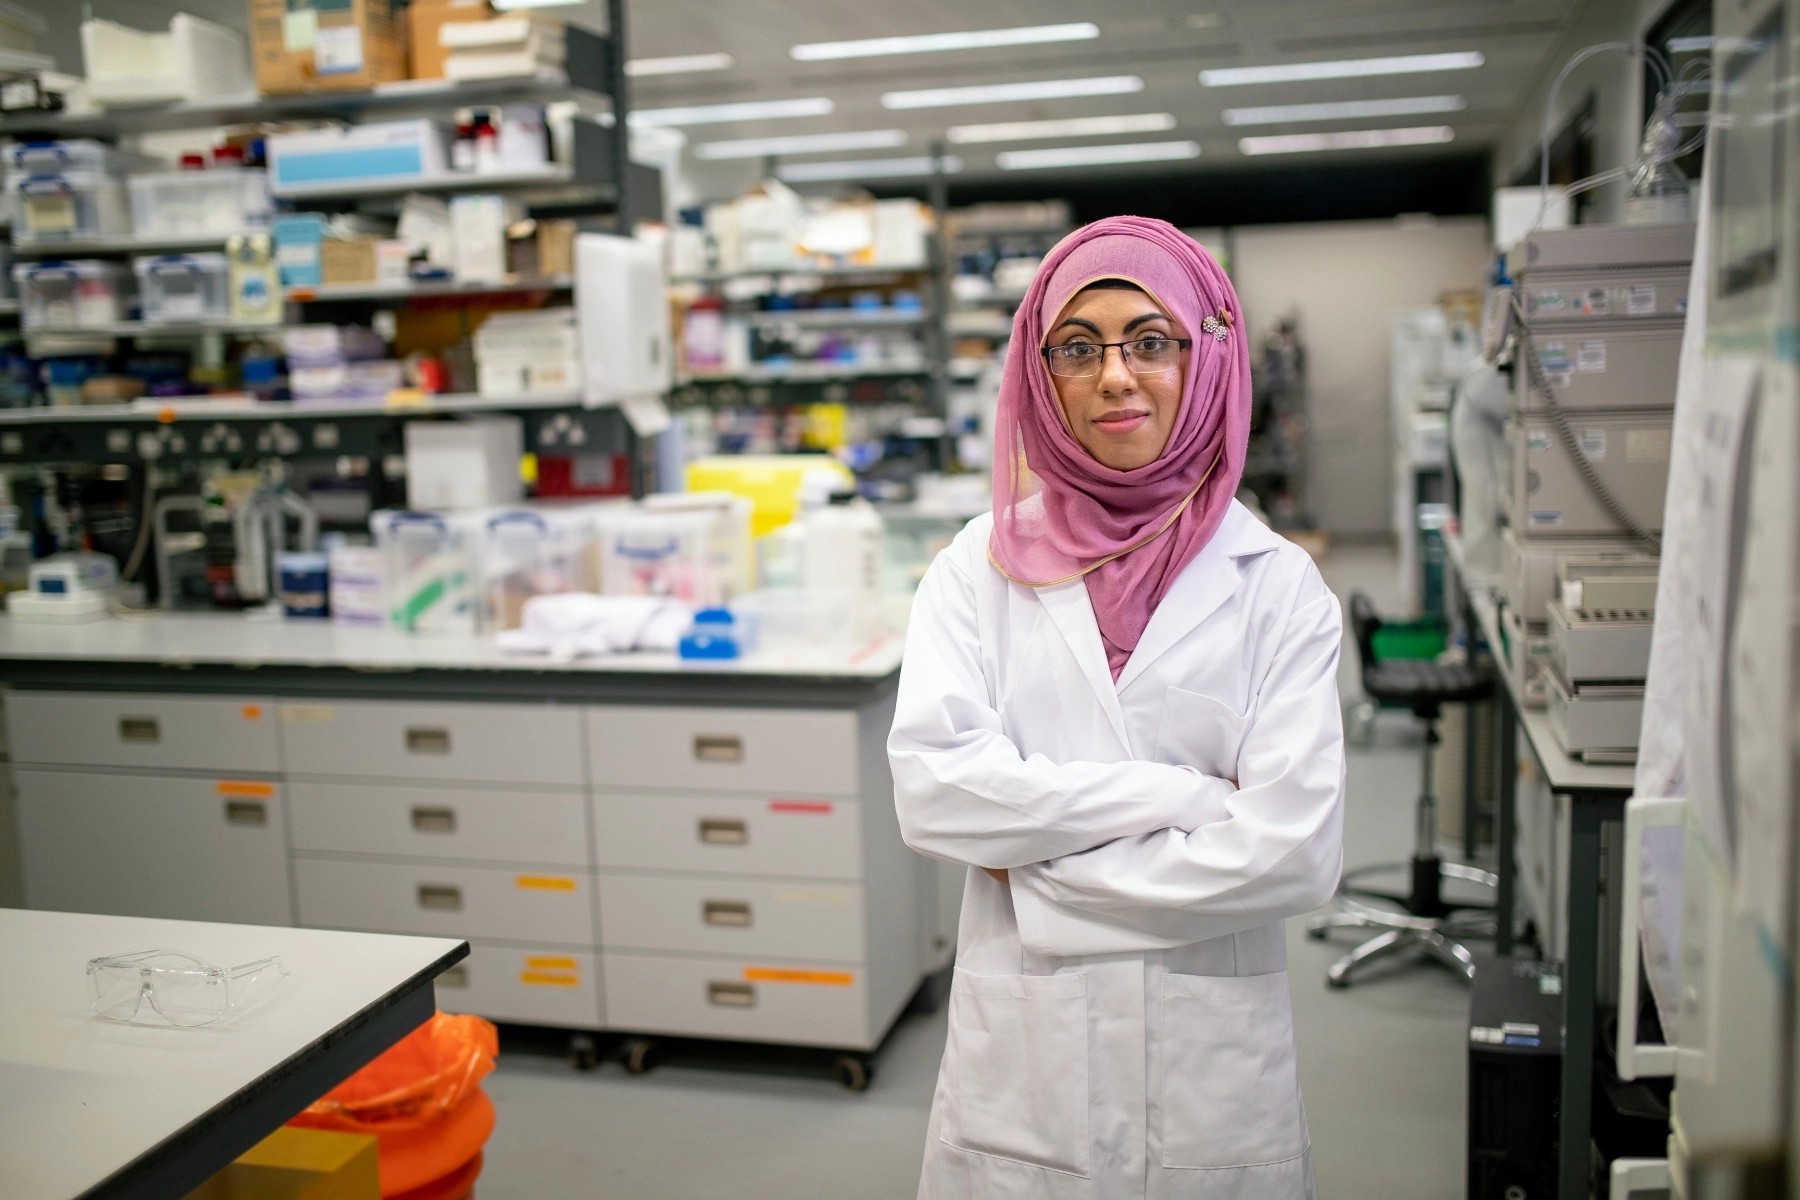 Biochemistry student standing in lab wearing lab coat and traditional hijab